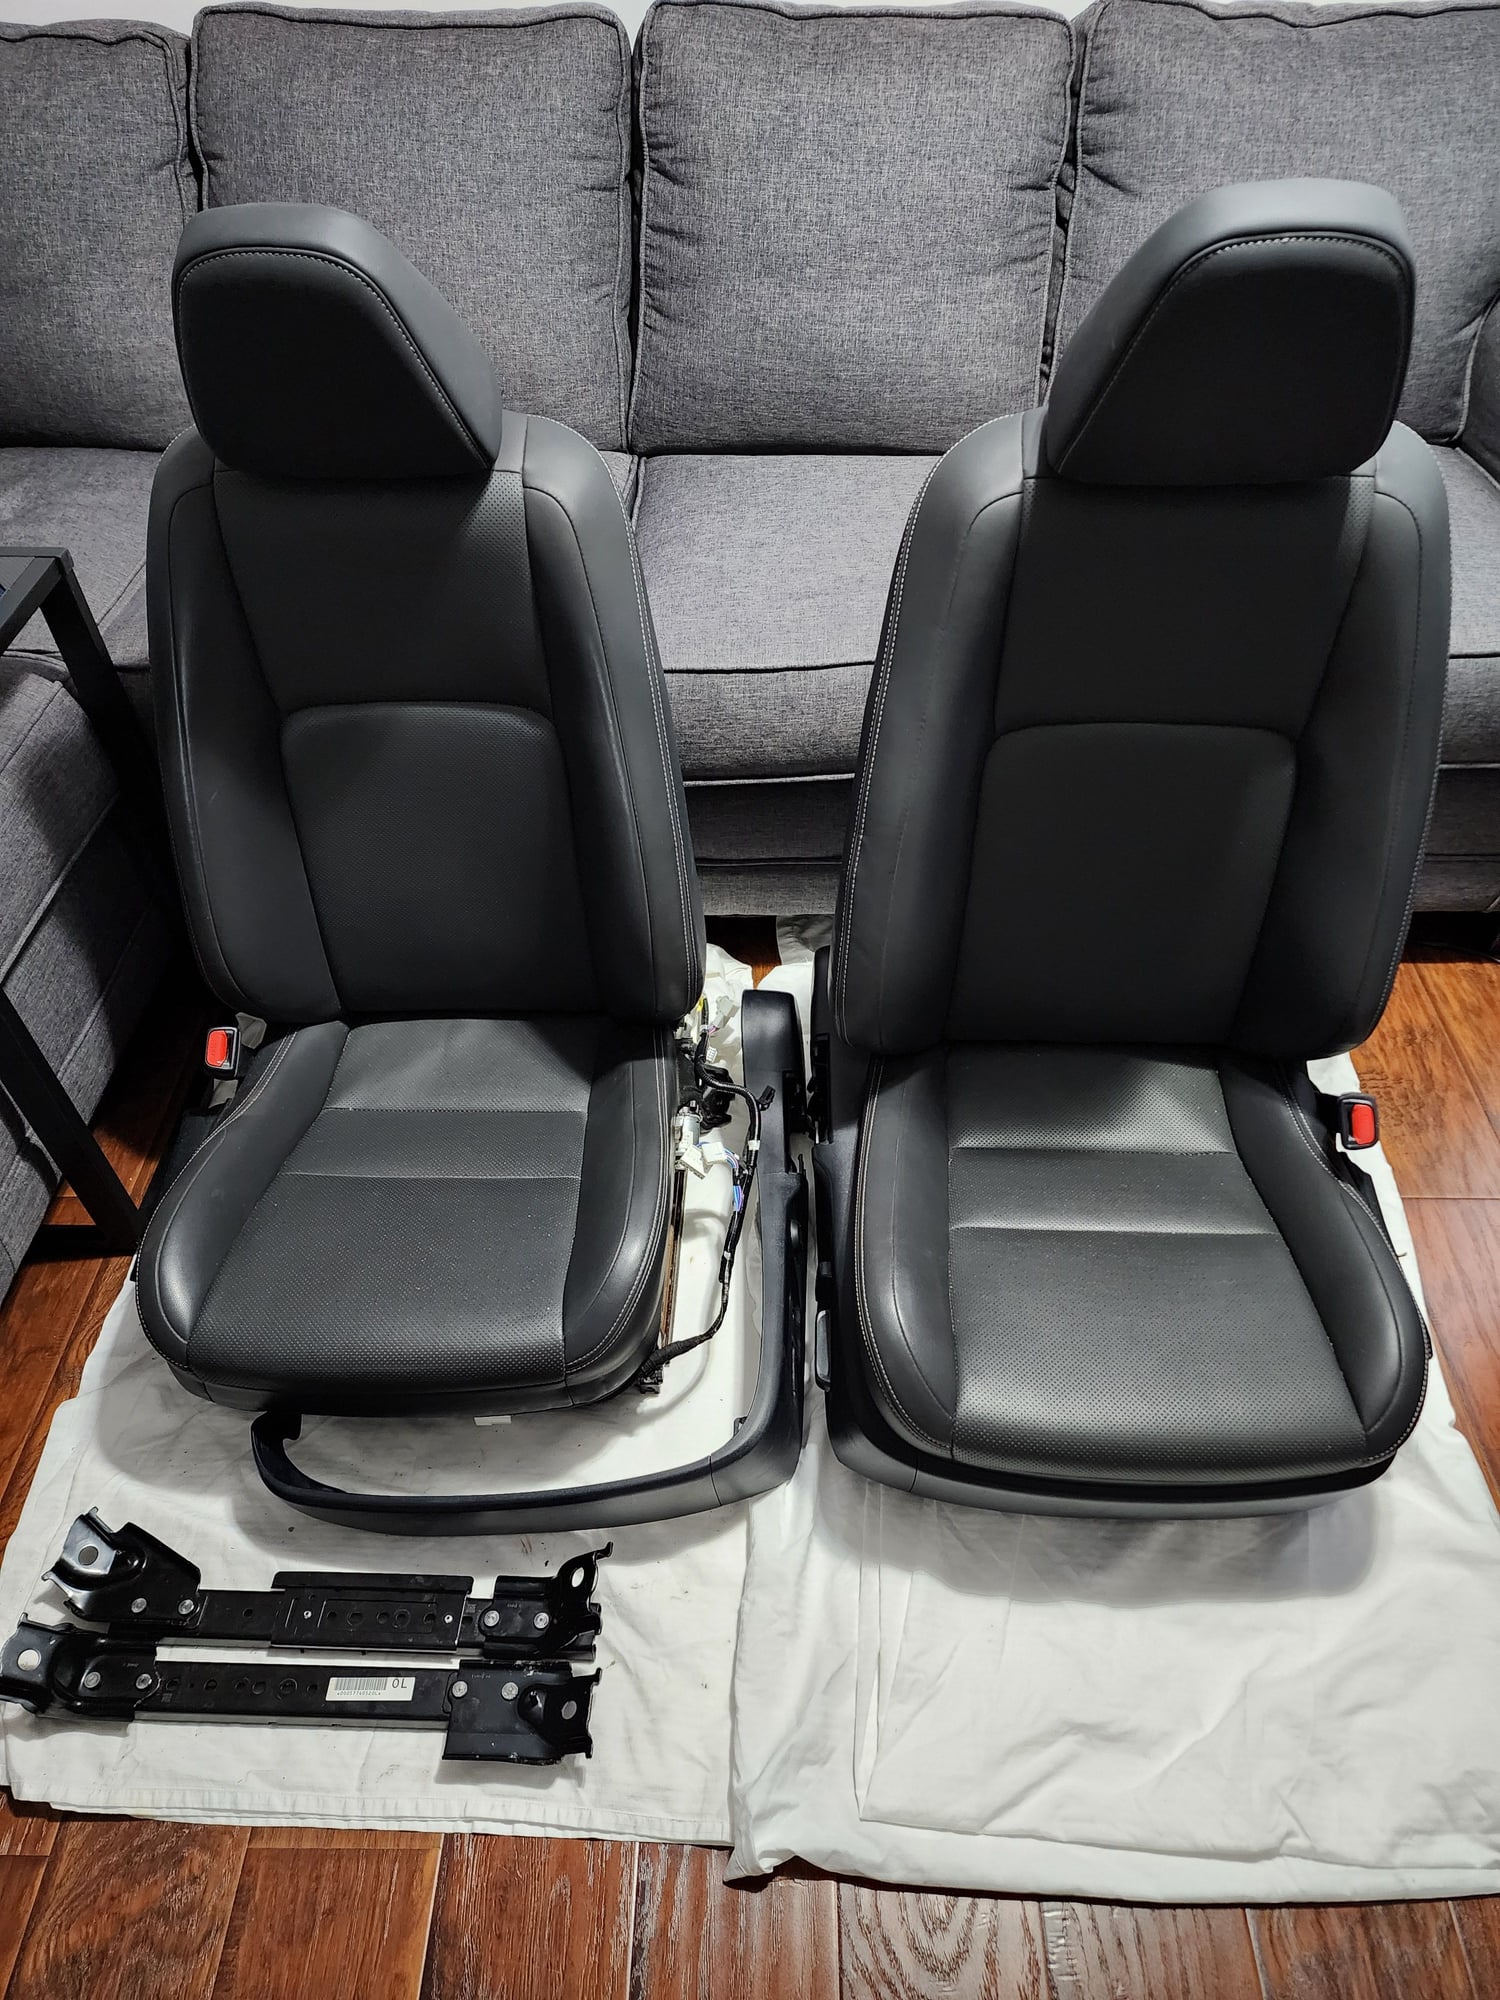 Interior/Upholstery - IS200T Seats, Door Panels and IS350 F Sport Switch covers + Memory Seat Buttons - Used - -1 to 2025  All Models - Montreal, QC H1N3R5, Canada